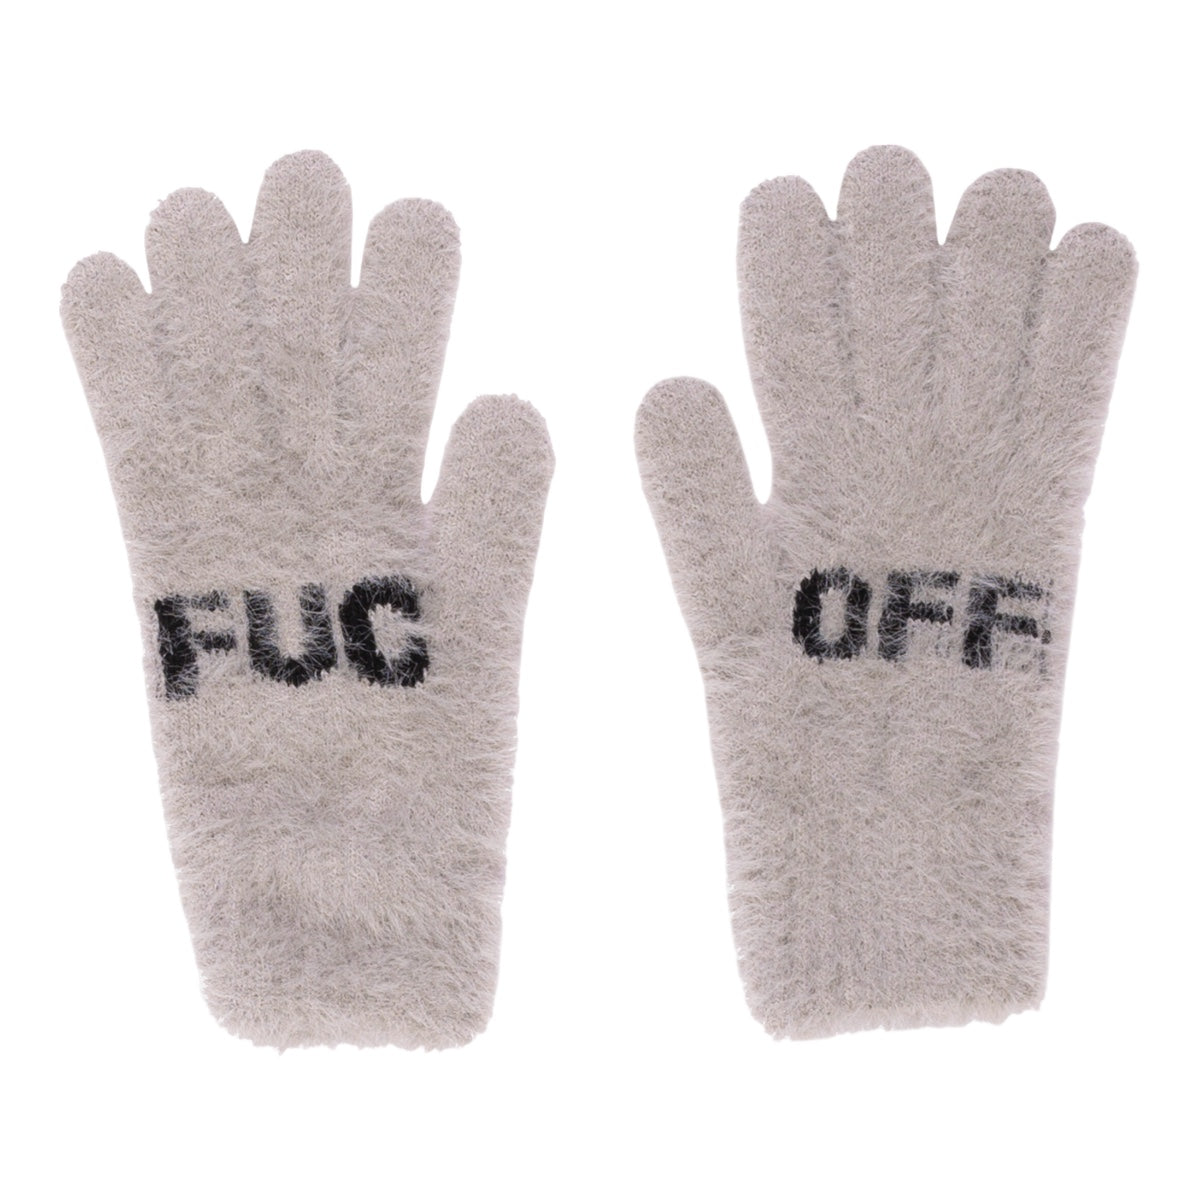 Hairy Gloves Grey, Red, Yellow - FUC